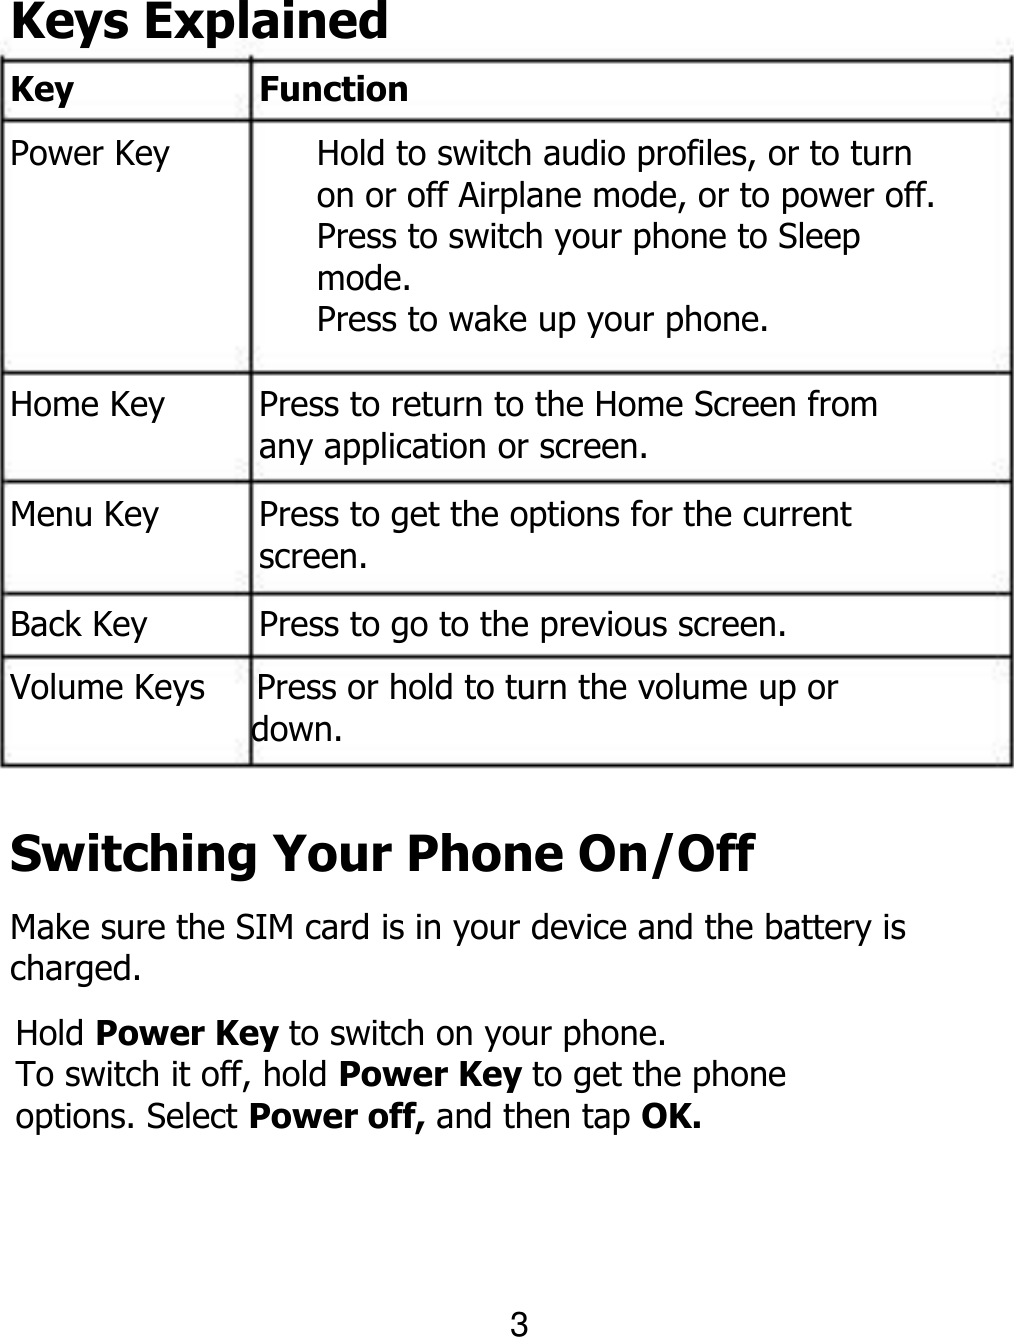 Keys Explained Key Power Key Function    Hold to switch audio profiles, or to turn on or off Airplane mode, or to power off. Press to switch your phone to Sleep mode. Press to wake up your phone. Home Key Menu Key Back Key Press to return to the Home Screen from any application or screen. Press to get the options for the current screen. Press to go to the previous screen. Volume Keys    Press or hold to turn the volume up or               down. Switching Your Phone On/Off Make sure the SIM card is in your device and the battery is charged.   Hold Power Key to switch on your phone. To switch it off, hold Power Key to get the phone options. Select Power off, and then tap OK. 3 